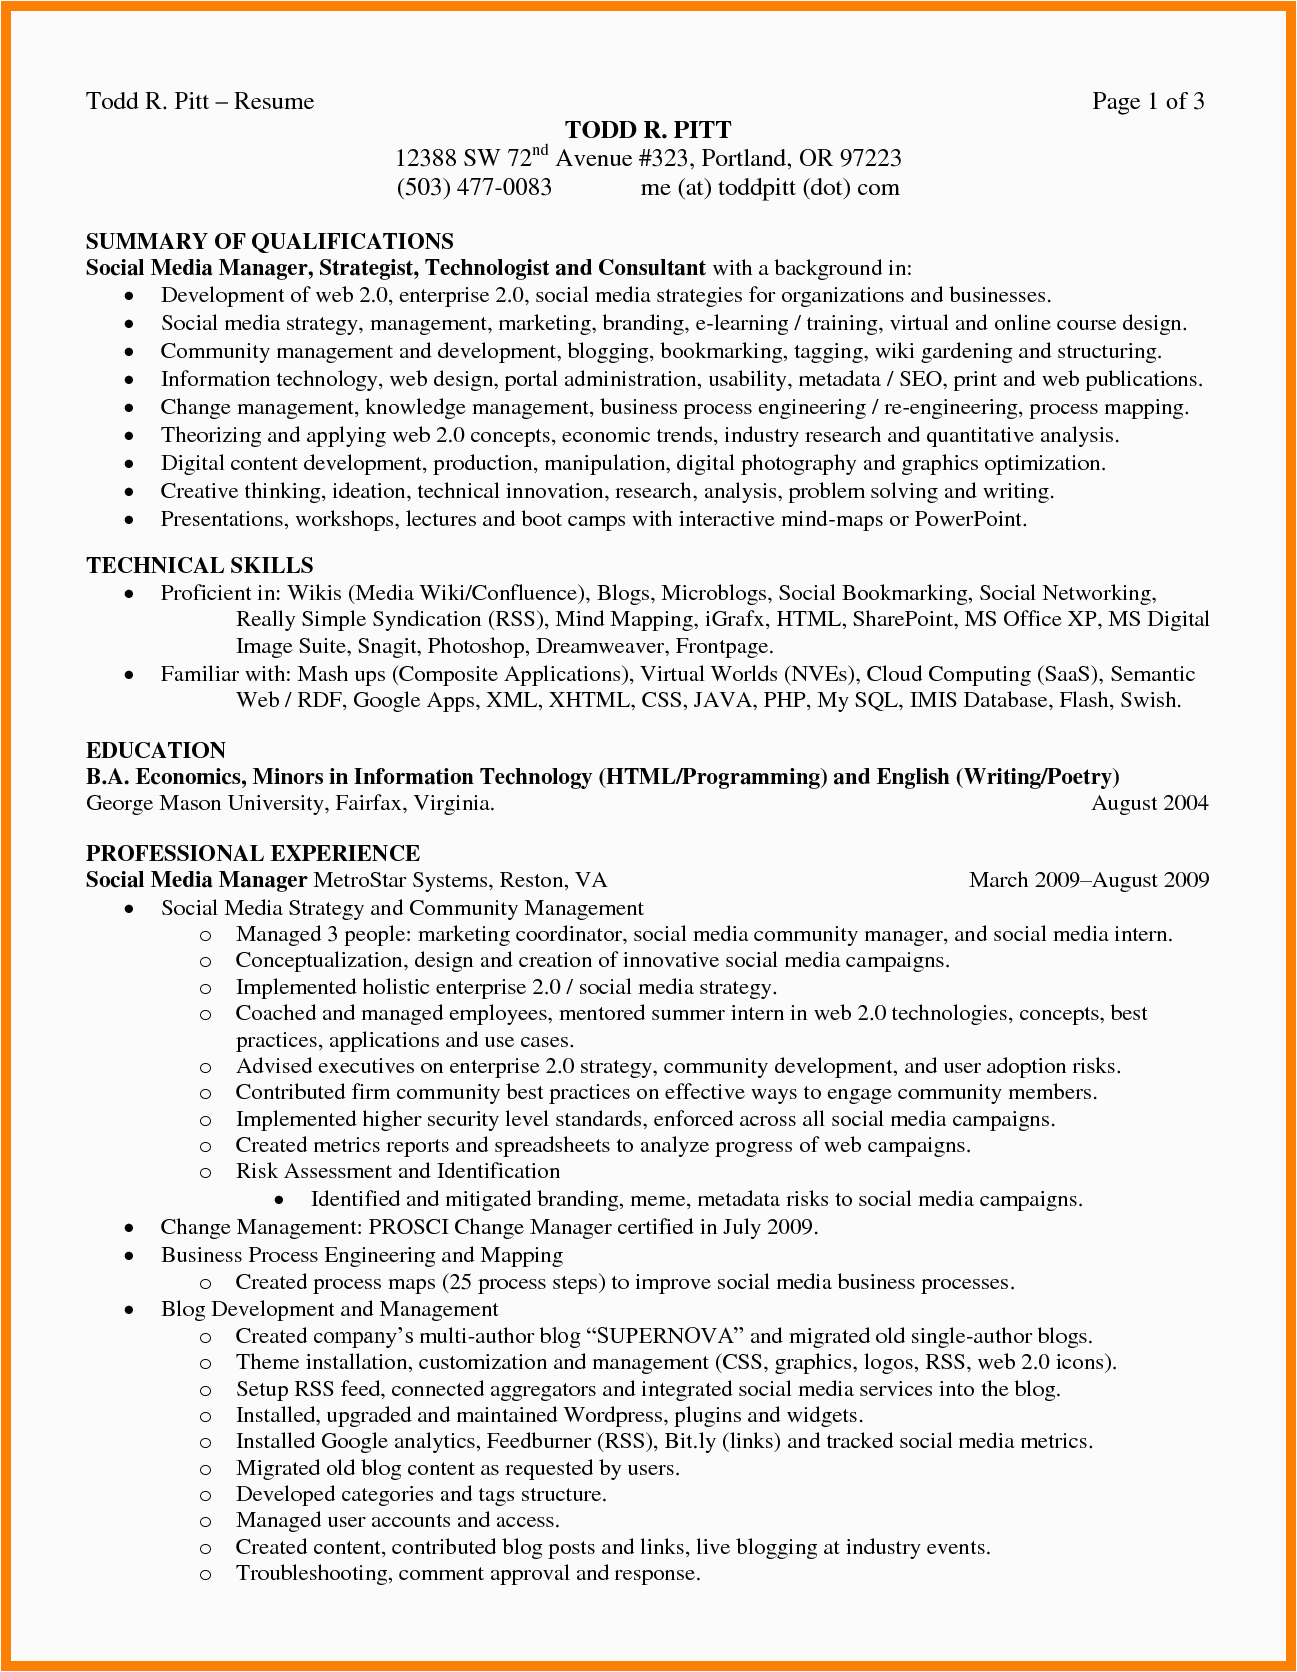 Sample Professional Resume Summary Of Qualifications 6 Summary Of Qualification Resume Examples Ledger Review